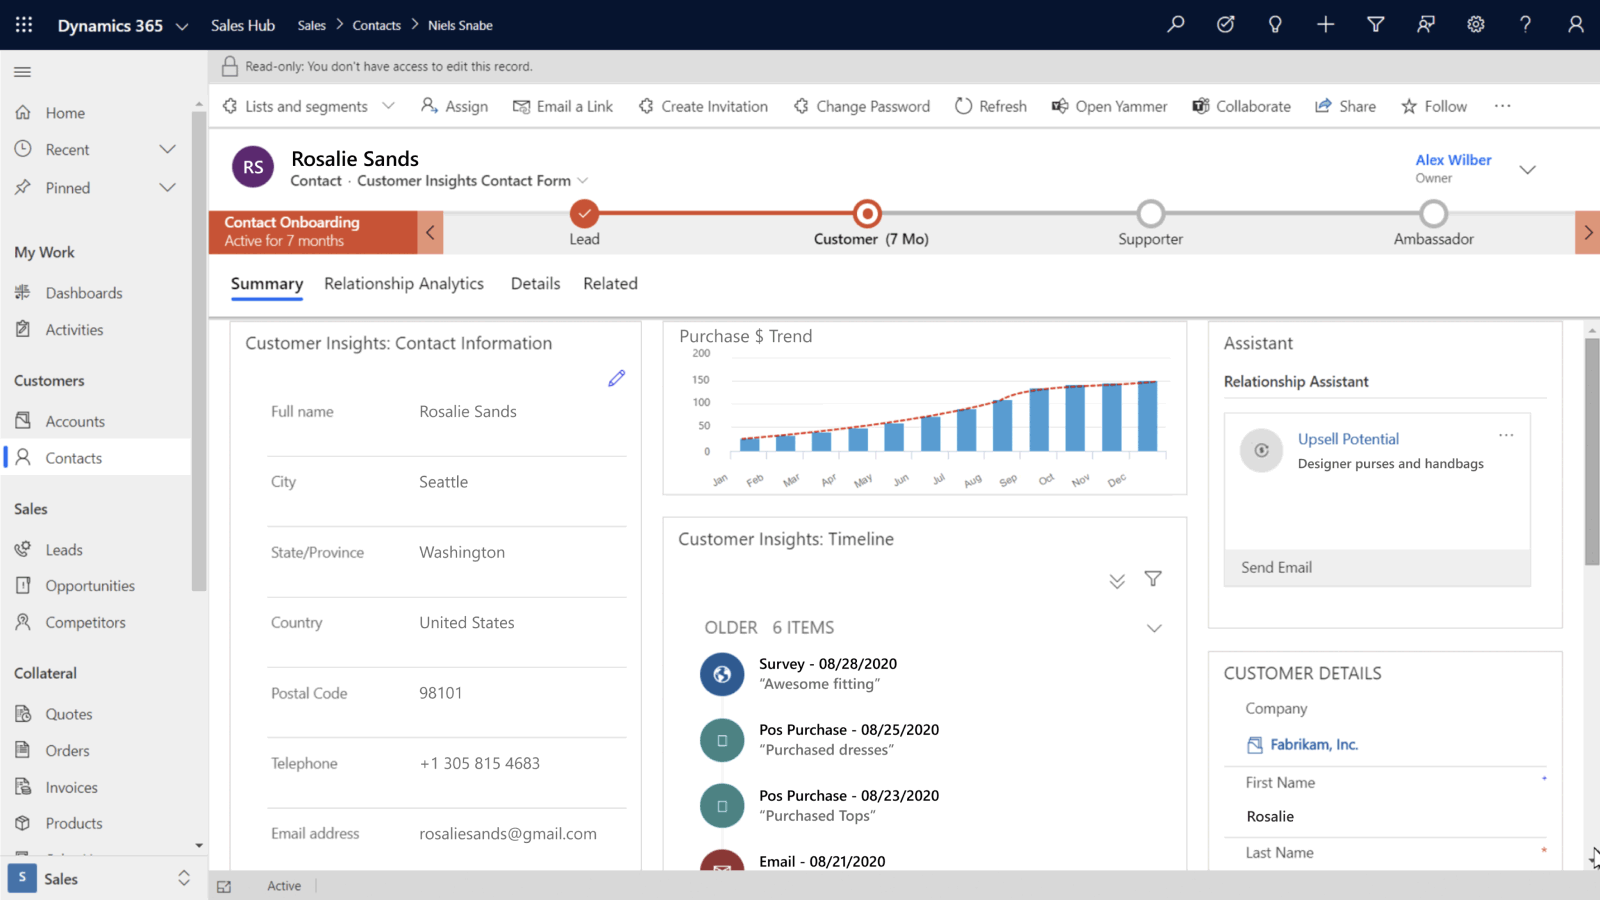 Image showing dynamics 365 customer contacts view with analytics